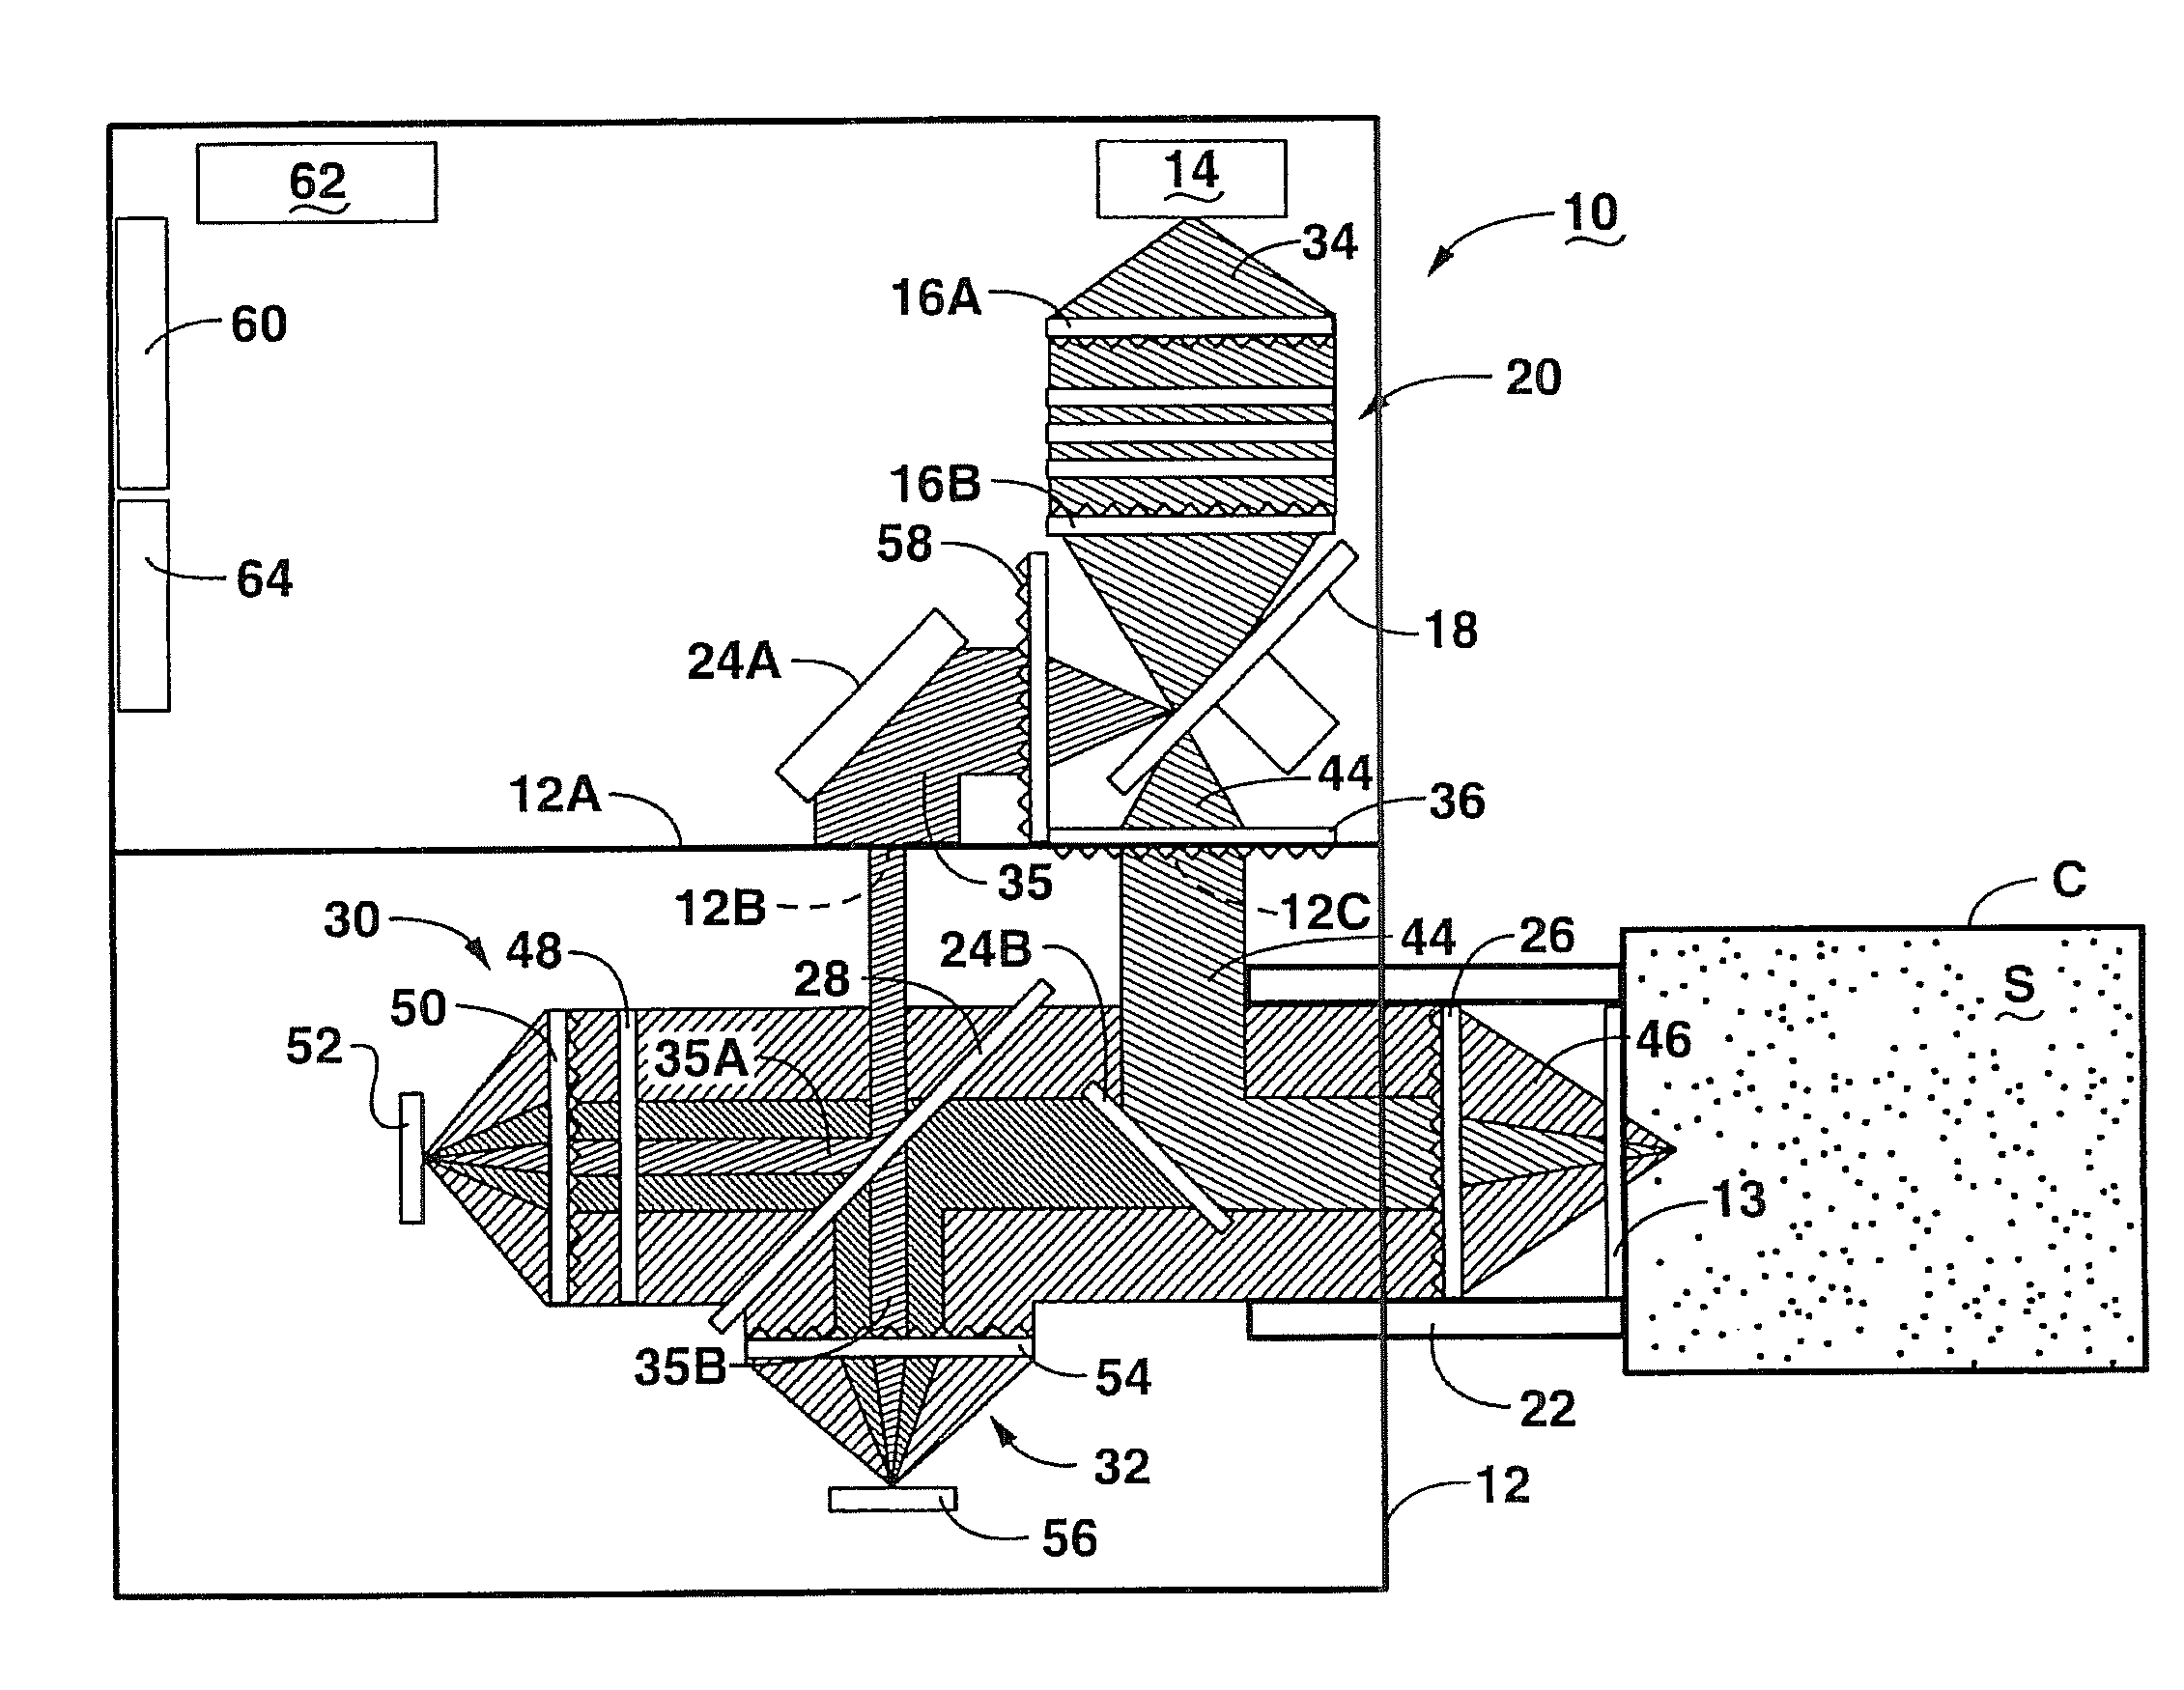 Multivariate optical elements for optical analysis system